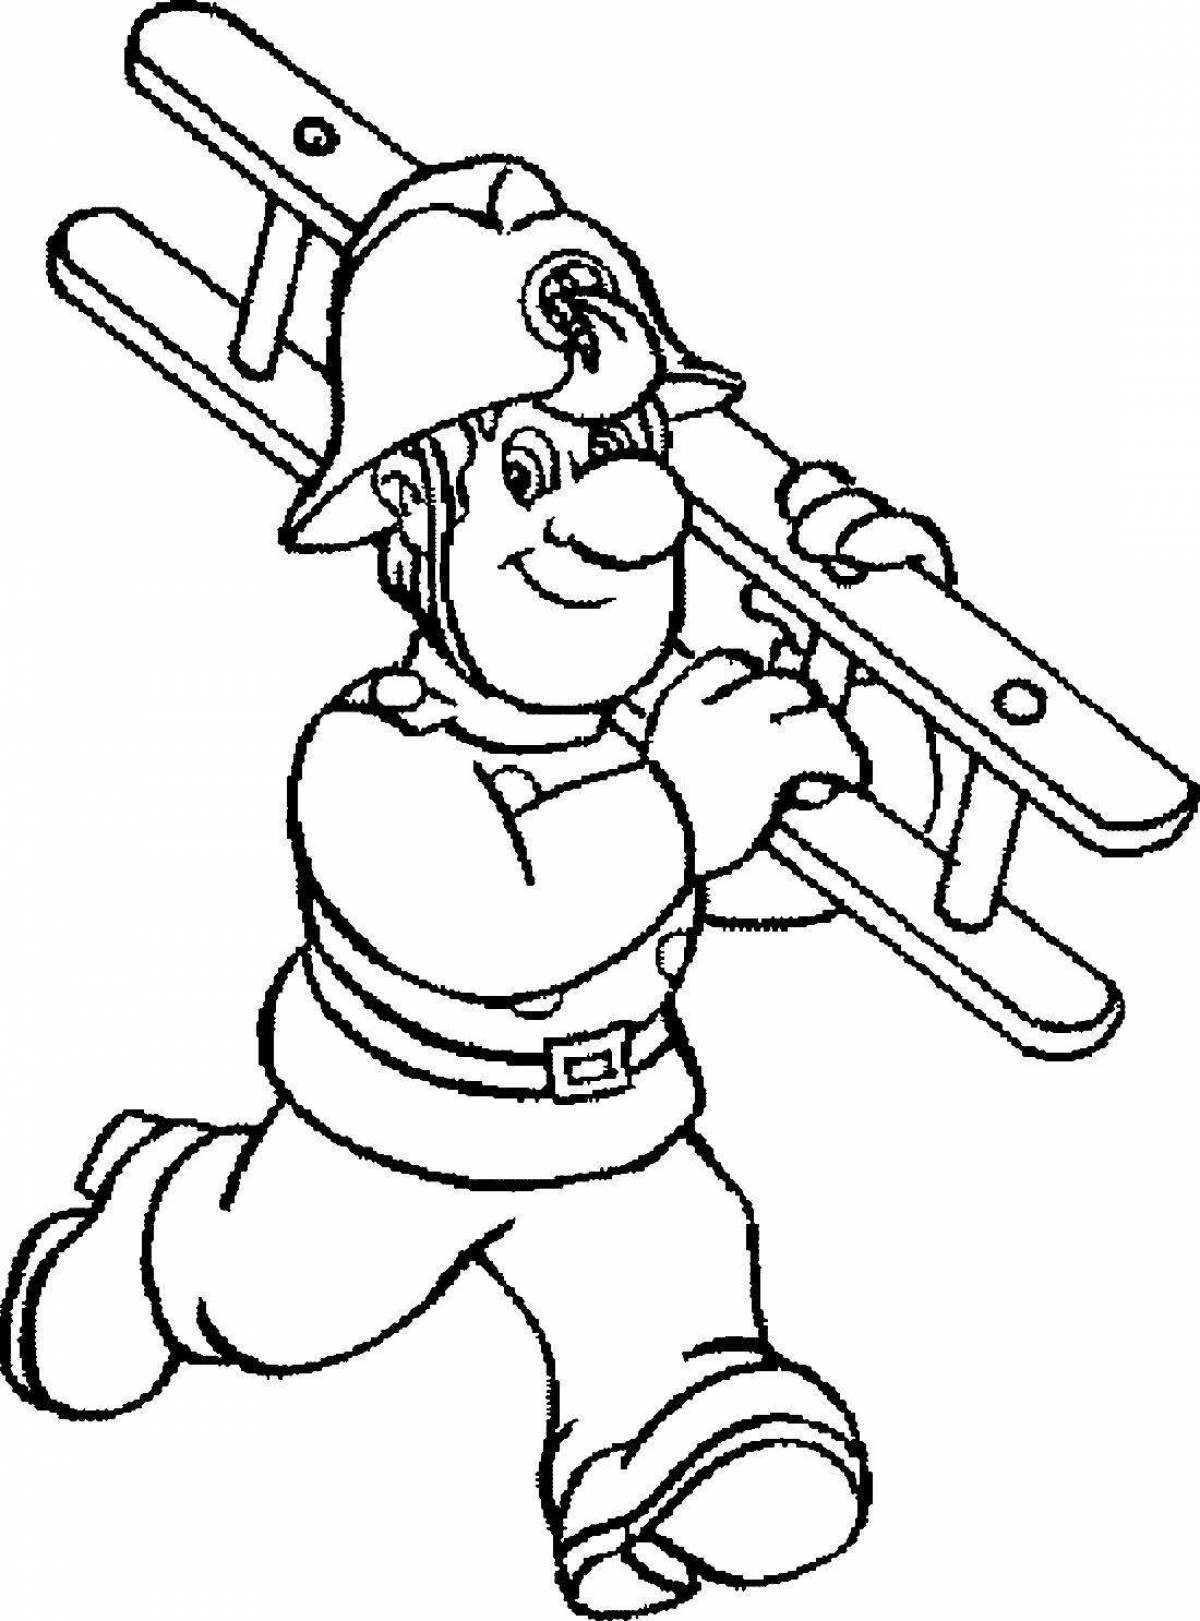 Fun drawing of a firefighter for children